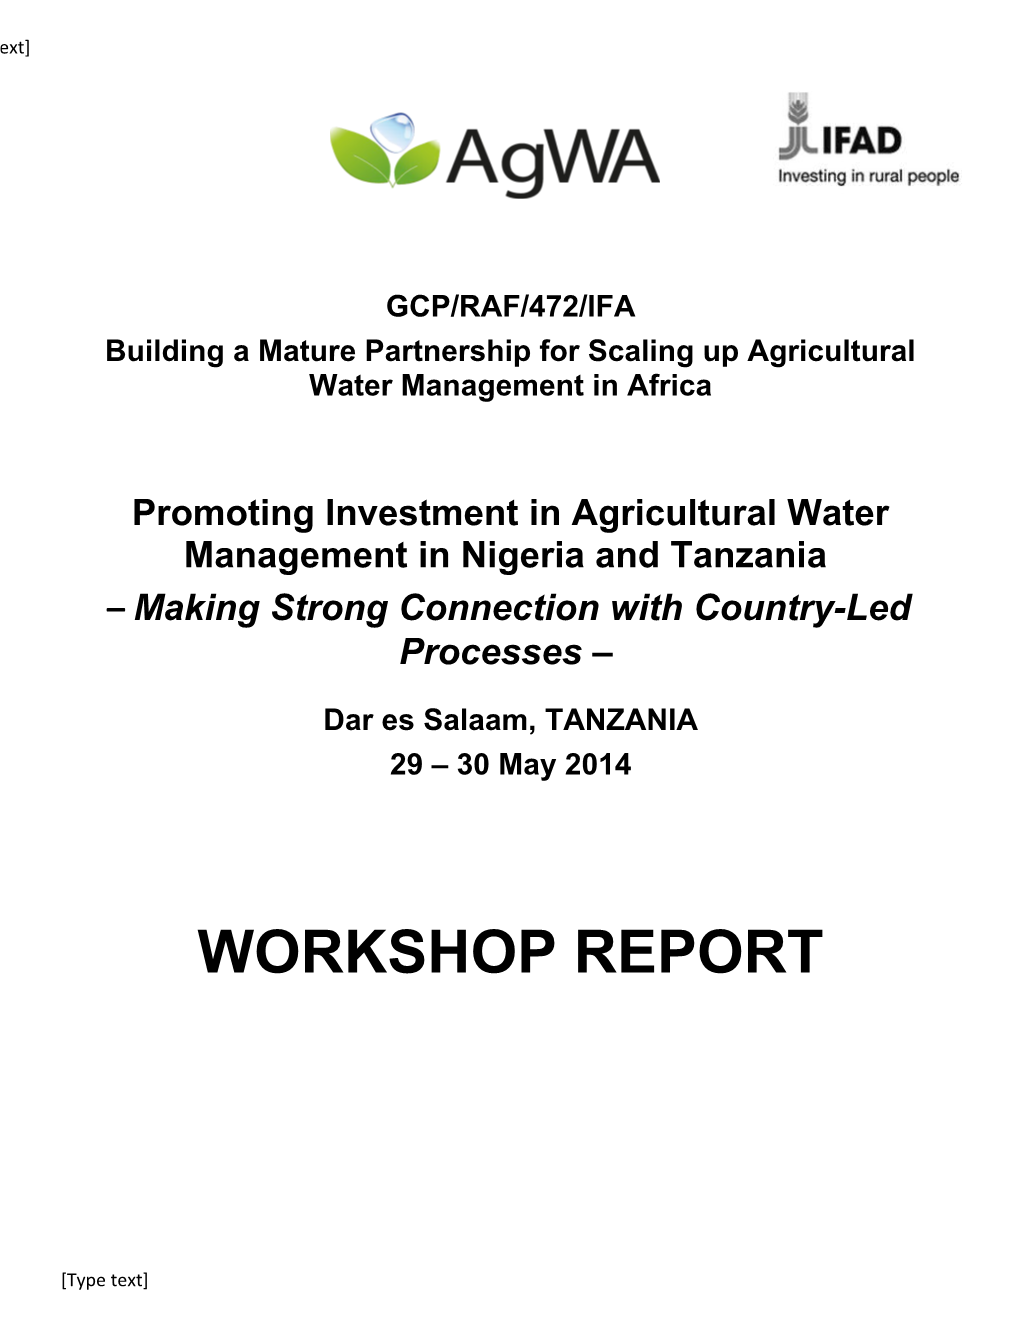 Building a Mature Partnership for Scaling up Agricultural Water Management in Africa